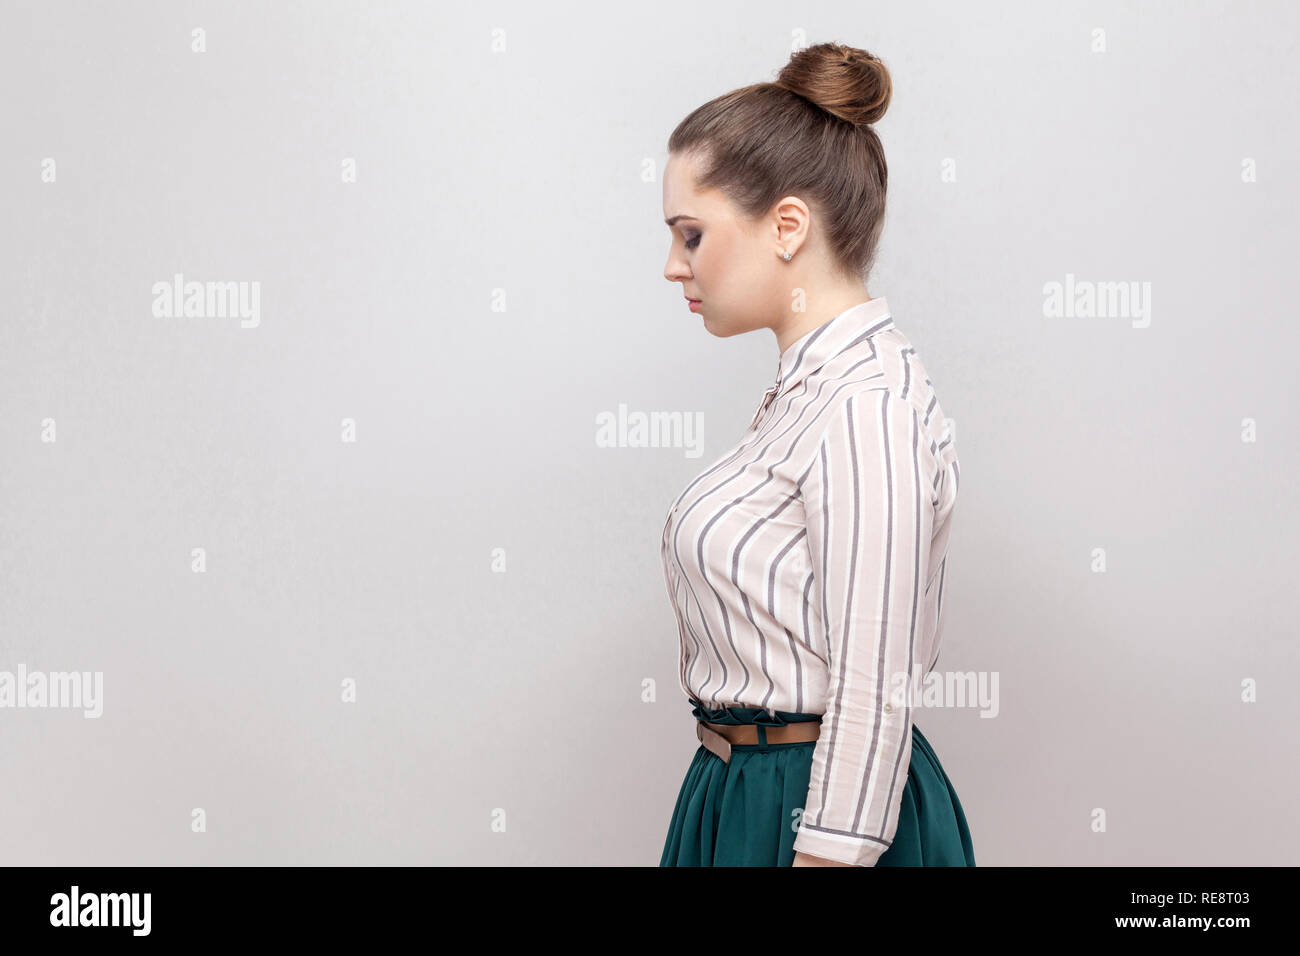 Profile side view portrait of unhappy beautiful young woman in striped shirt and green skirt and collected ban hairstyle, standing and holding her hea Stock Photo